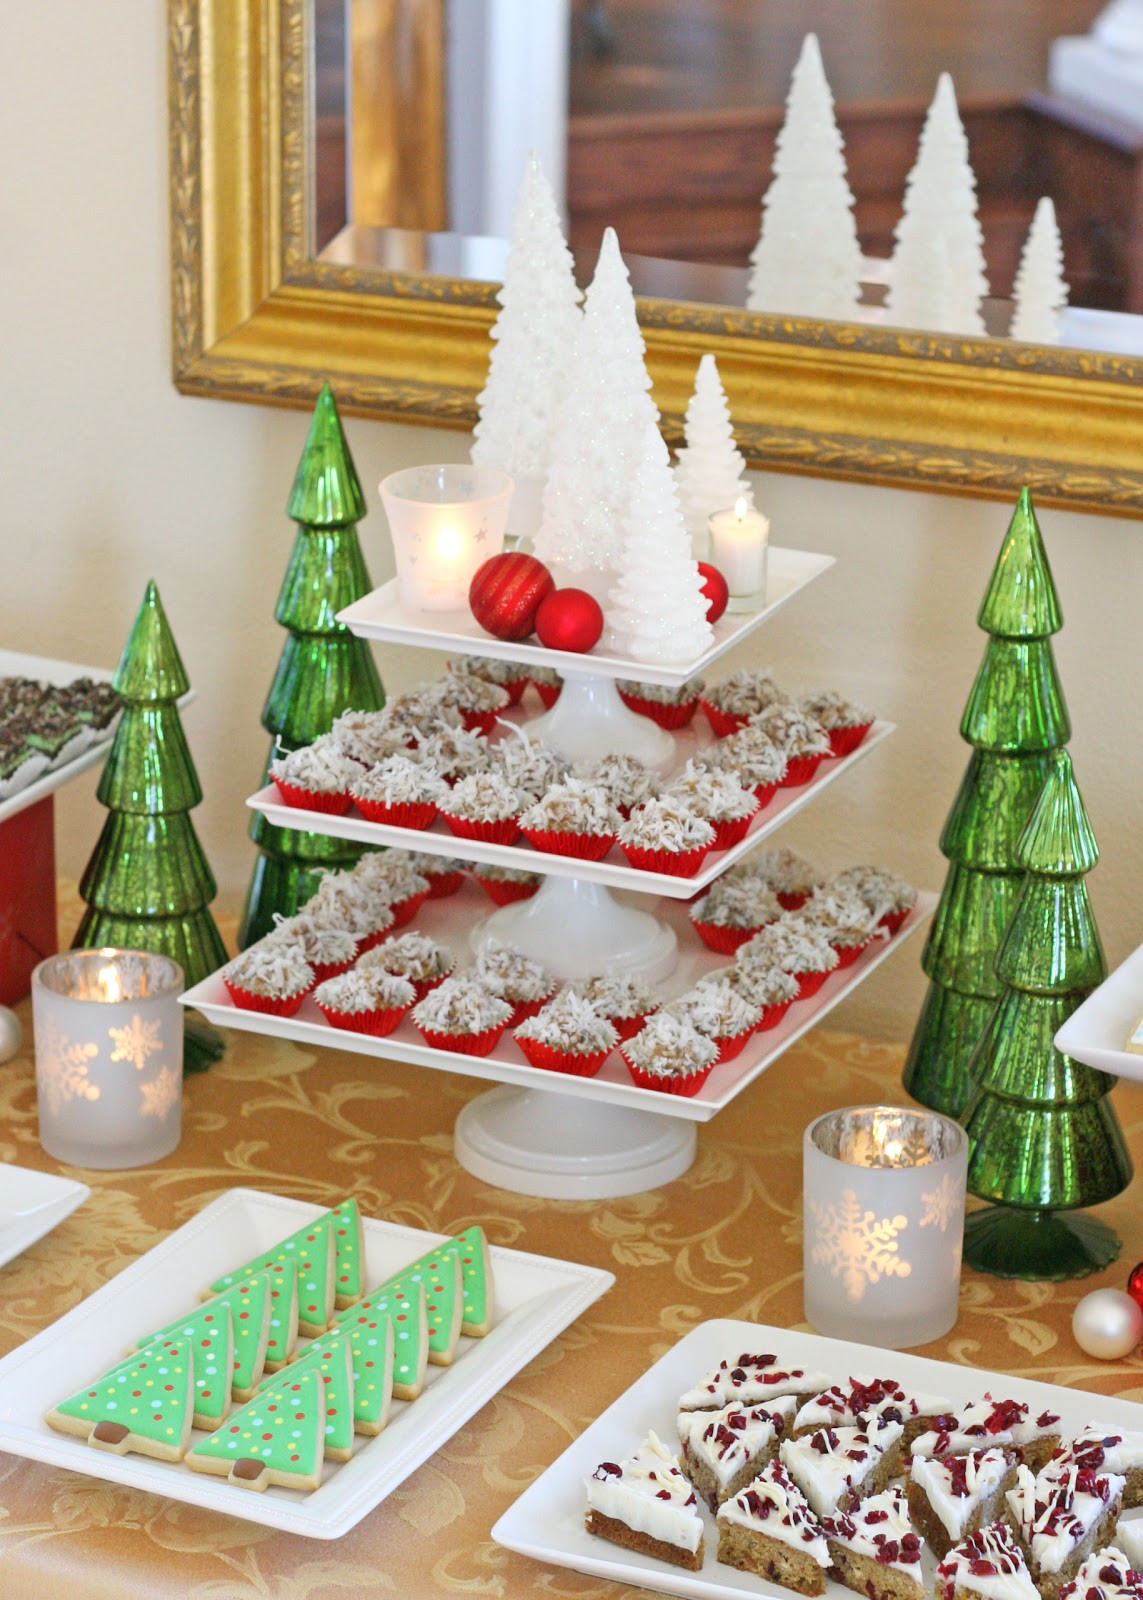 Christmas Party Table Decoration Ideas
 Classic Holiday Dessert Table Glorious Treats